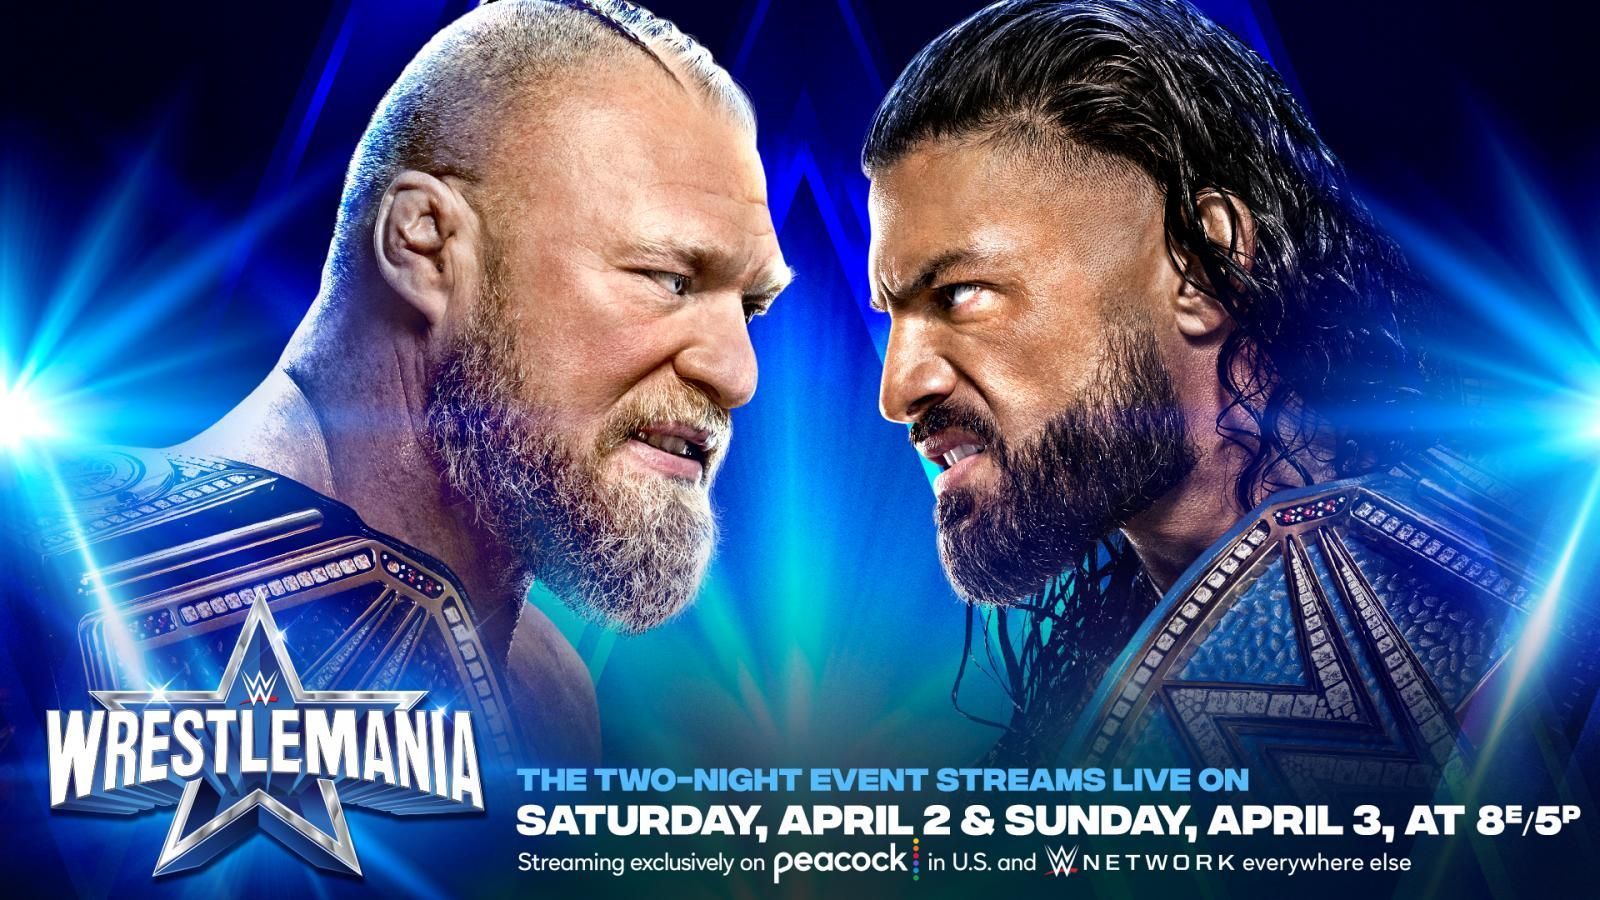 WrestleMania 38 will be a blockbuster show headlined by this match